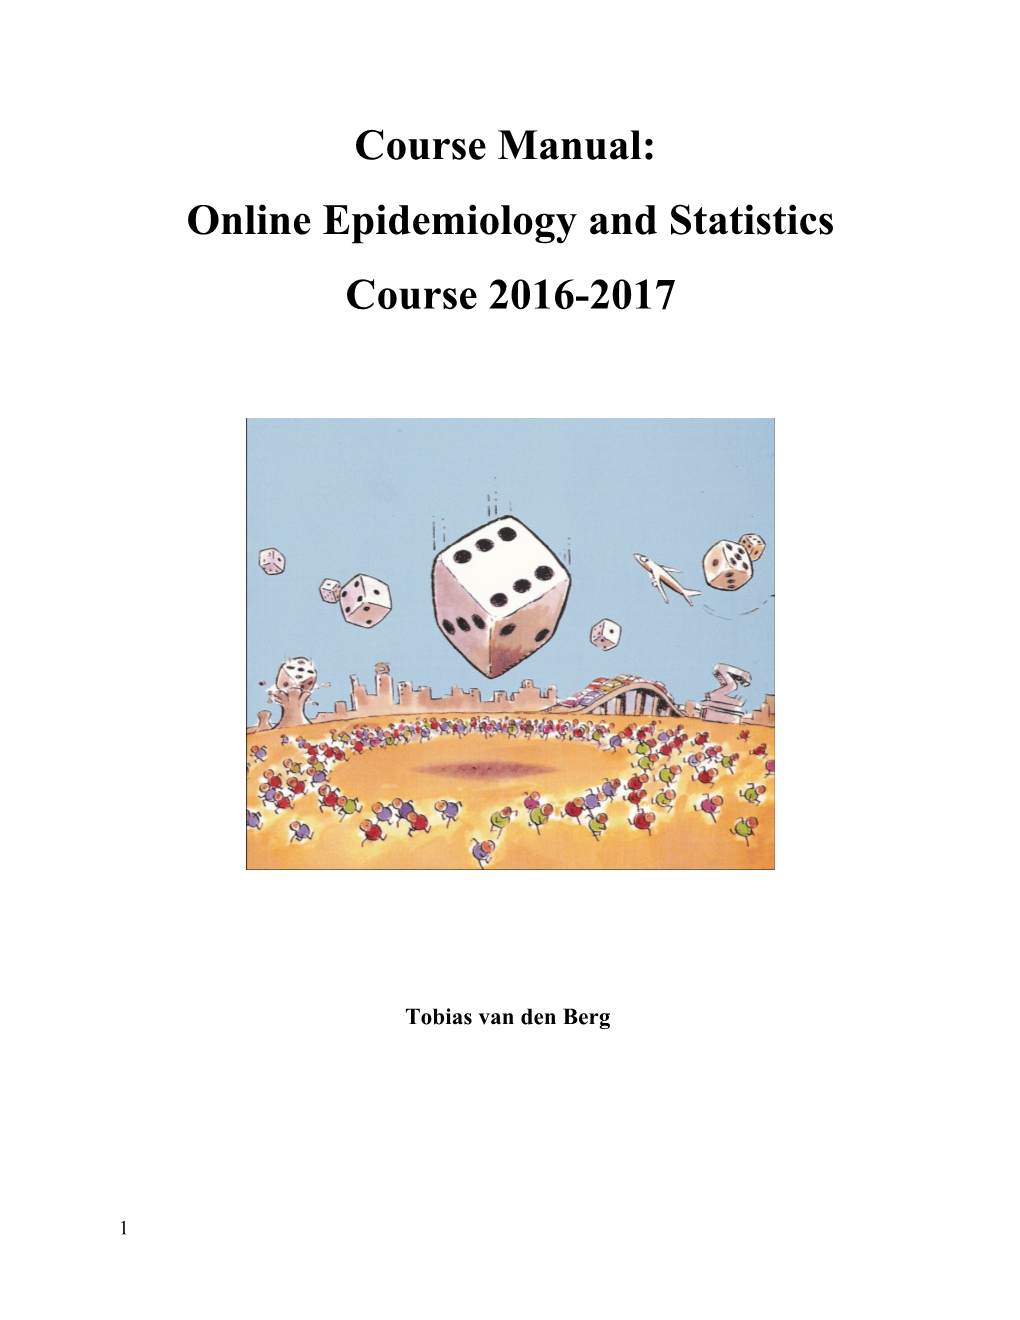 Onlineepidemiology and Statistics Course 2016-2017